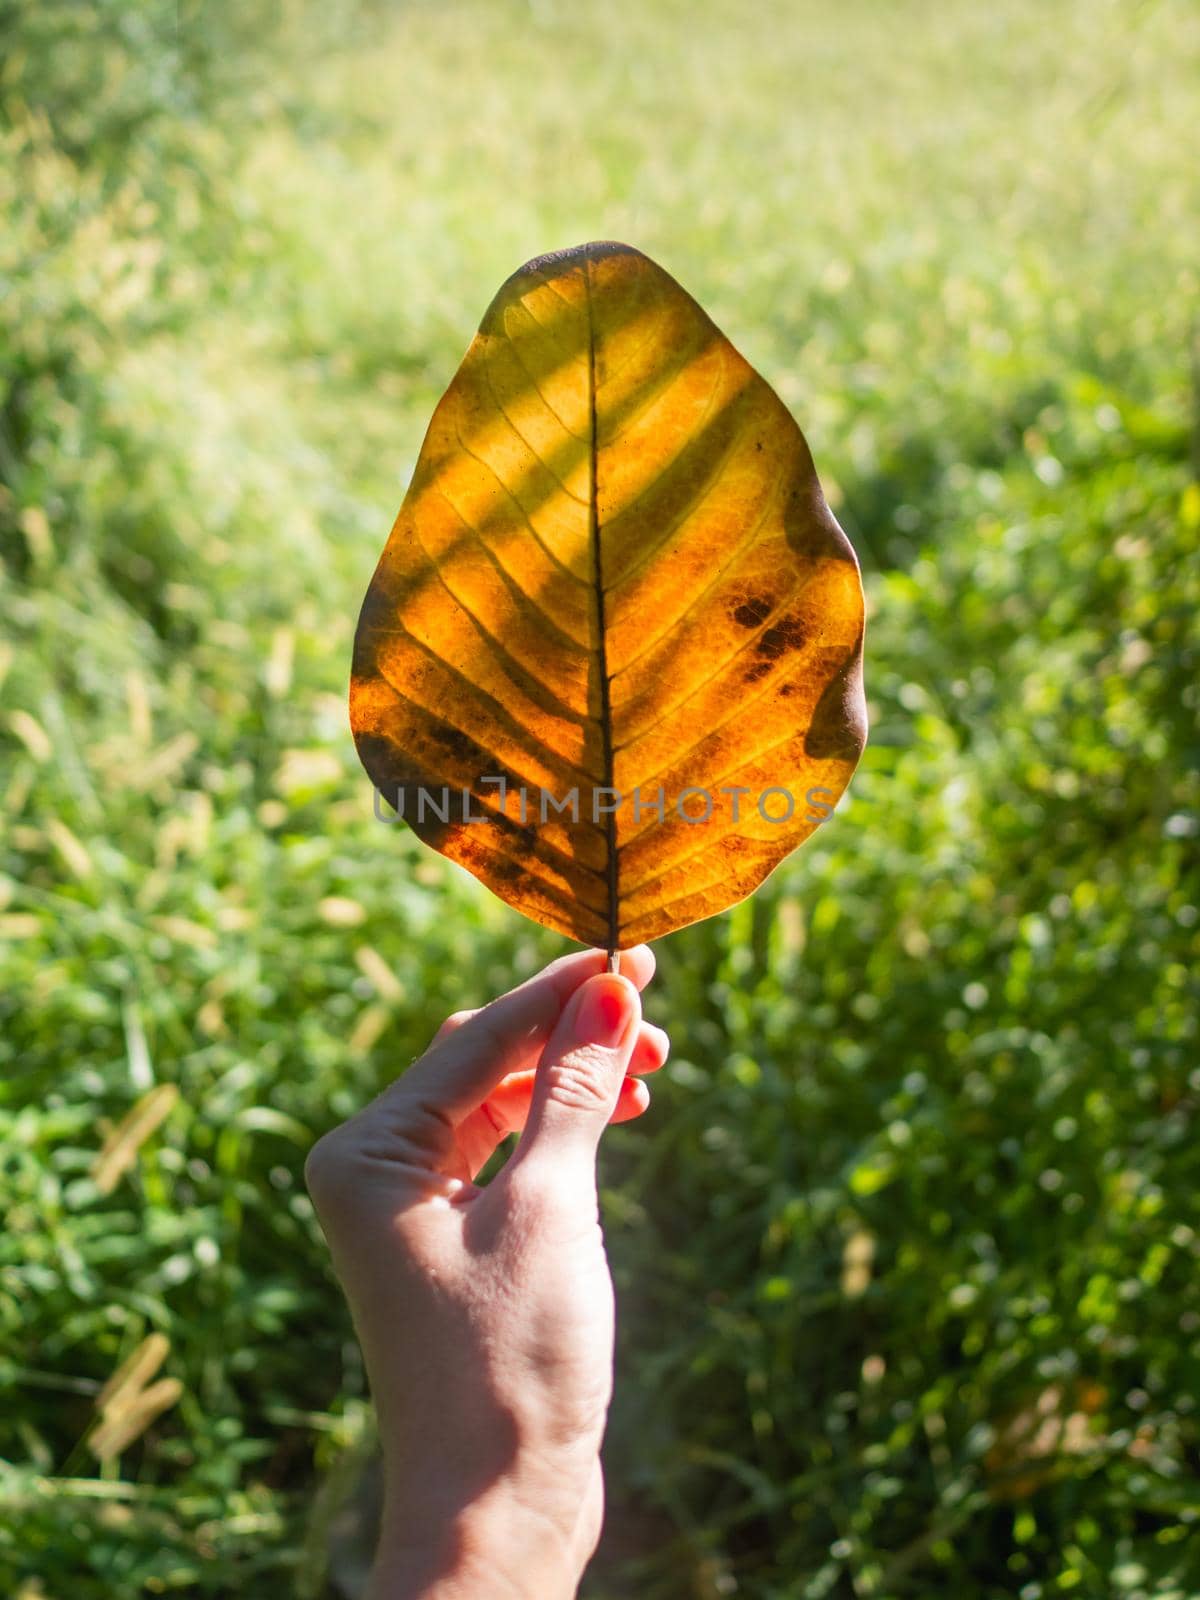 Woman holds bright orange tree leaf on green grass background. Symbol of summer end. Beginning of autumn. Fall season is near.